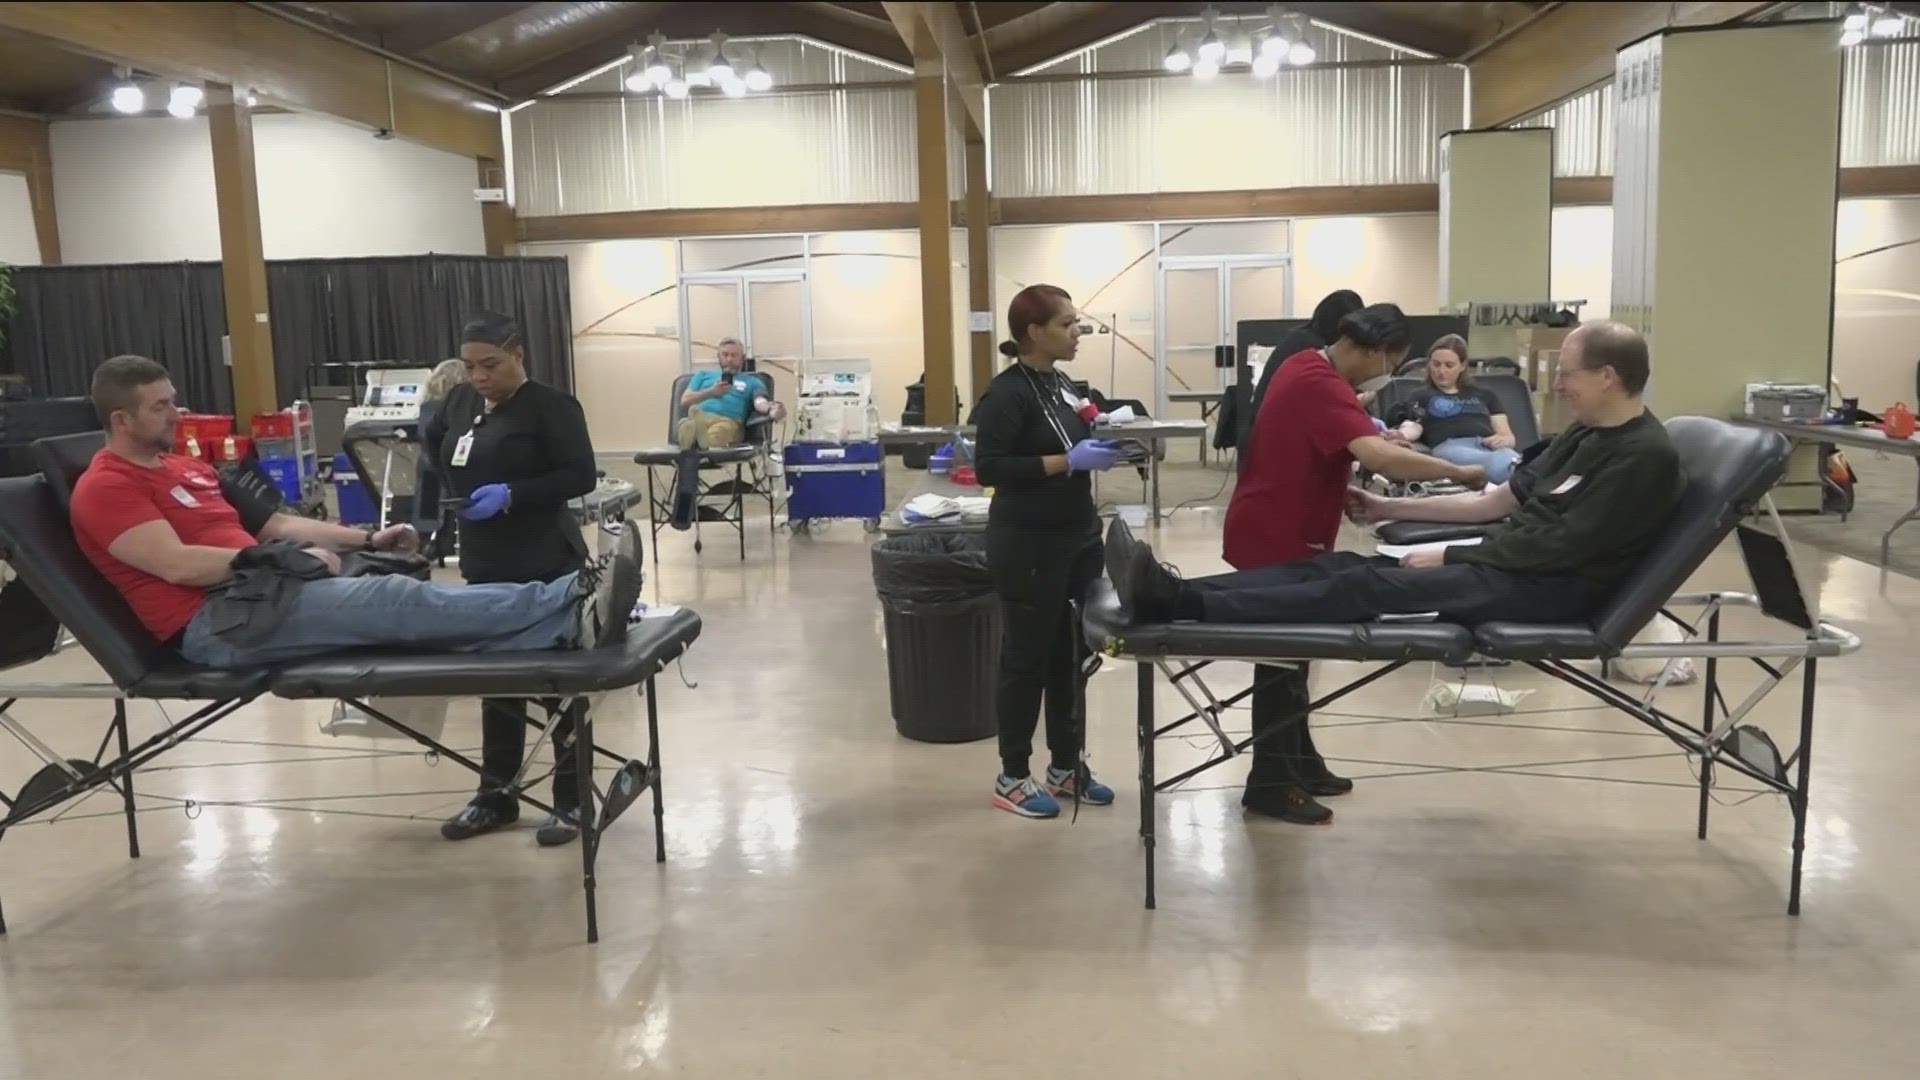 Over the last 20 years, the American Red Cross says they have seen a 40% decrease in blood donations.